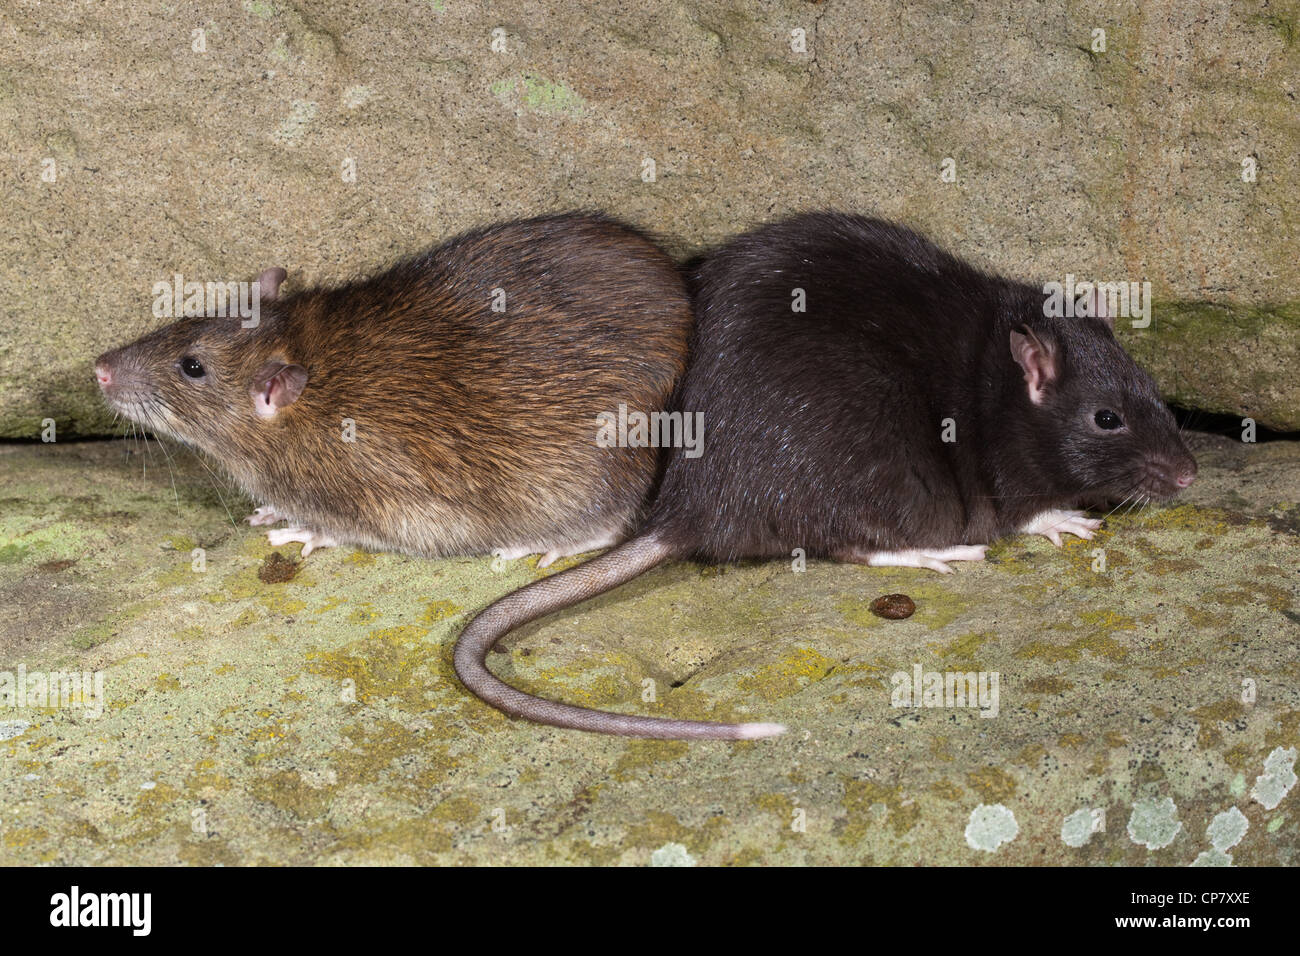 Brown Rats (Rattus norvegicus). 'Black' or melanisic form right, alongside a 'normal' coloured animal, left. Stock Photo